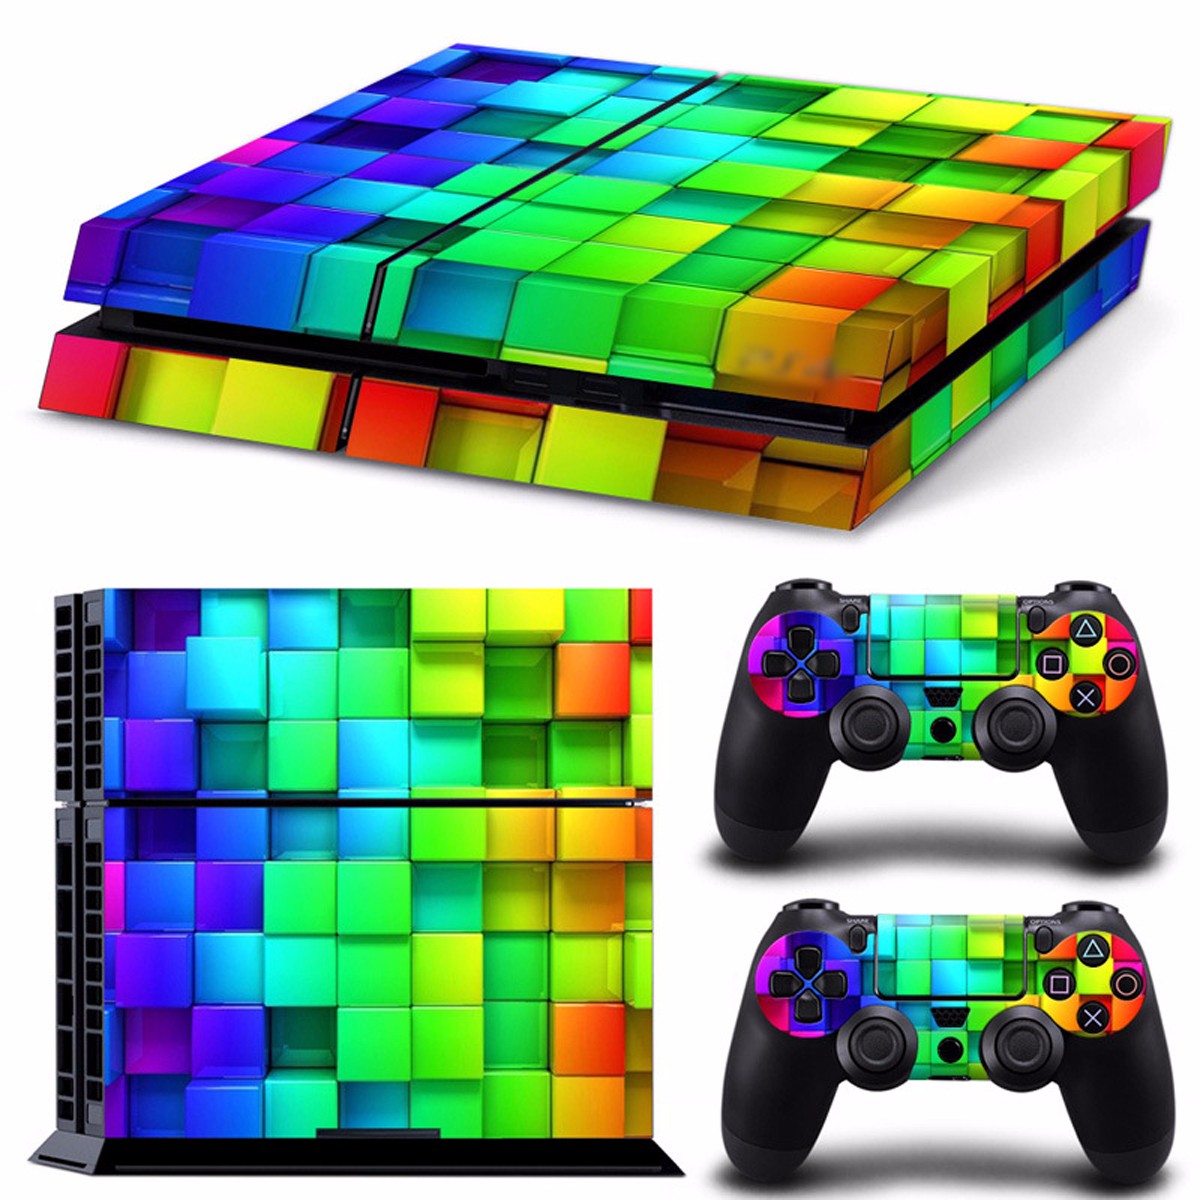 Lattice Style Vinyl Skin Decal For PS4 Play Station 4 Console and 2 Controllers 58